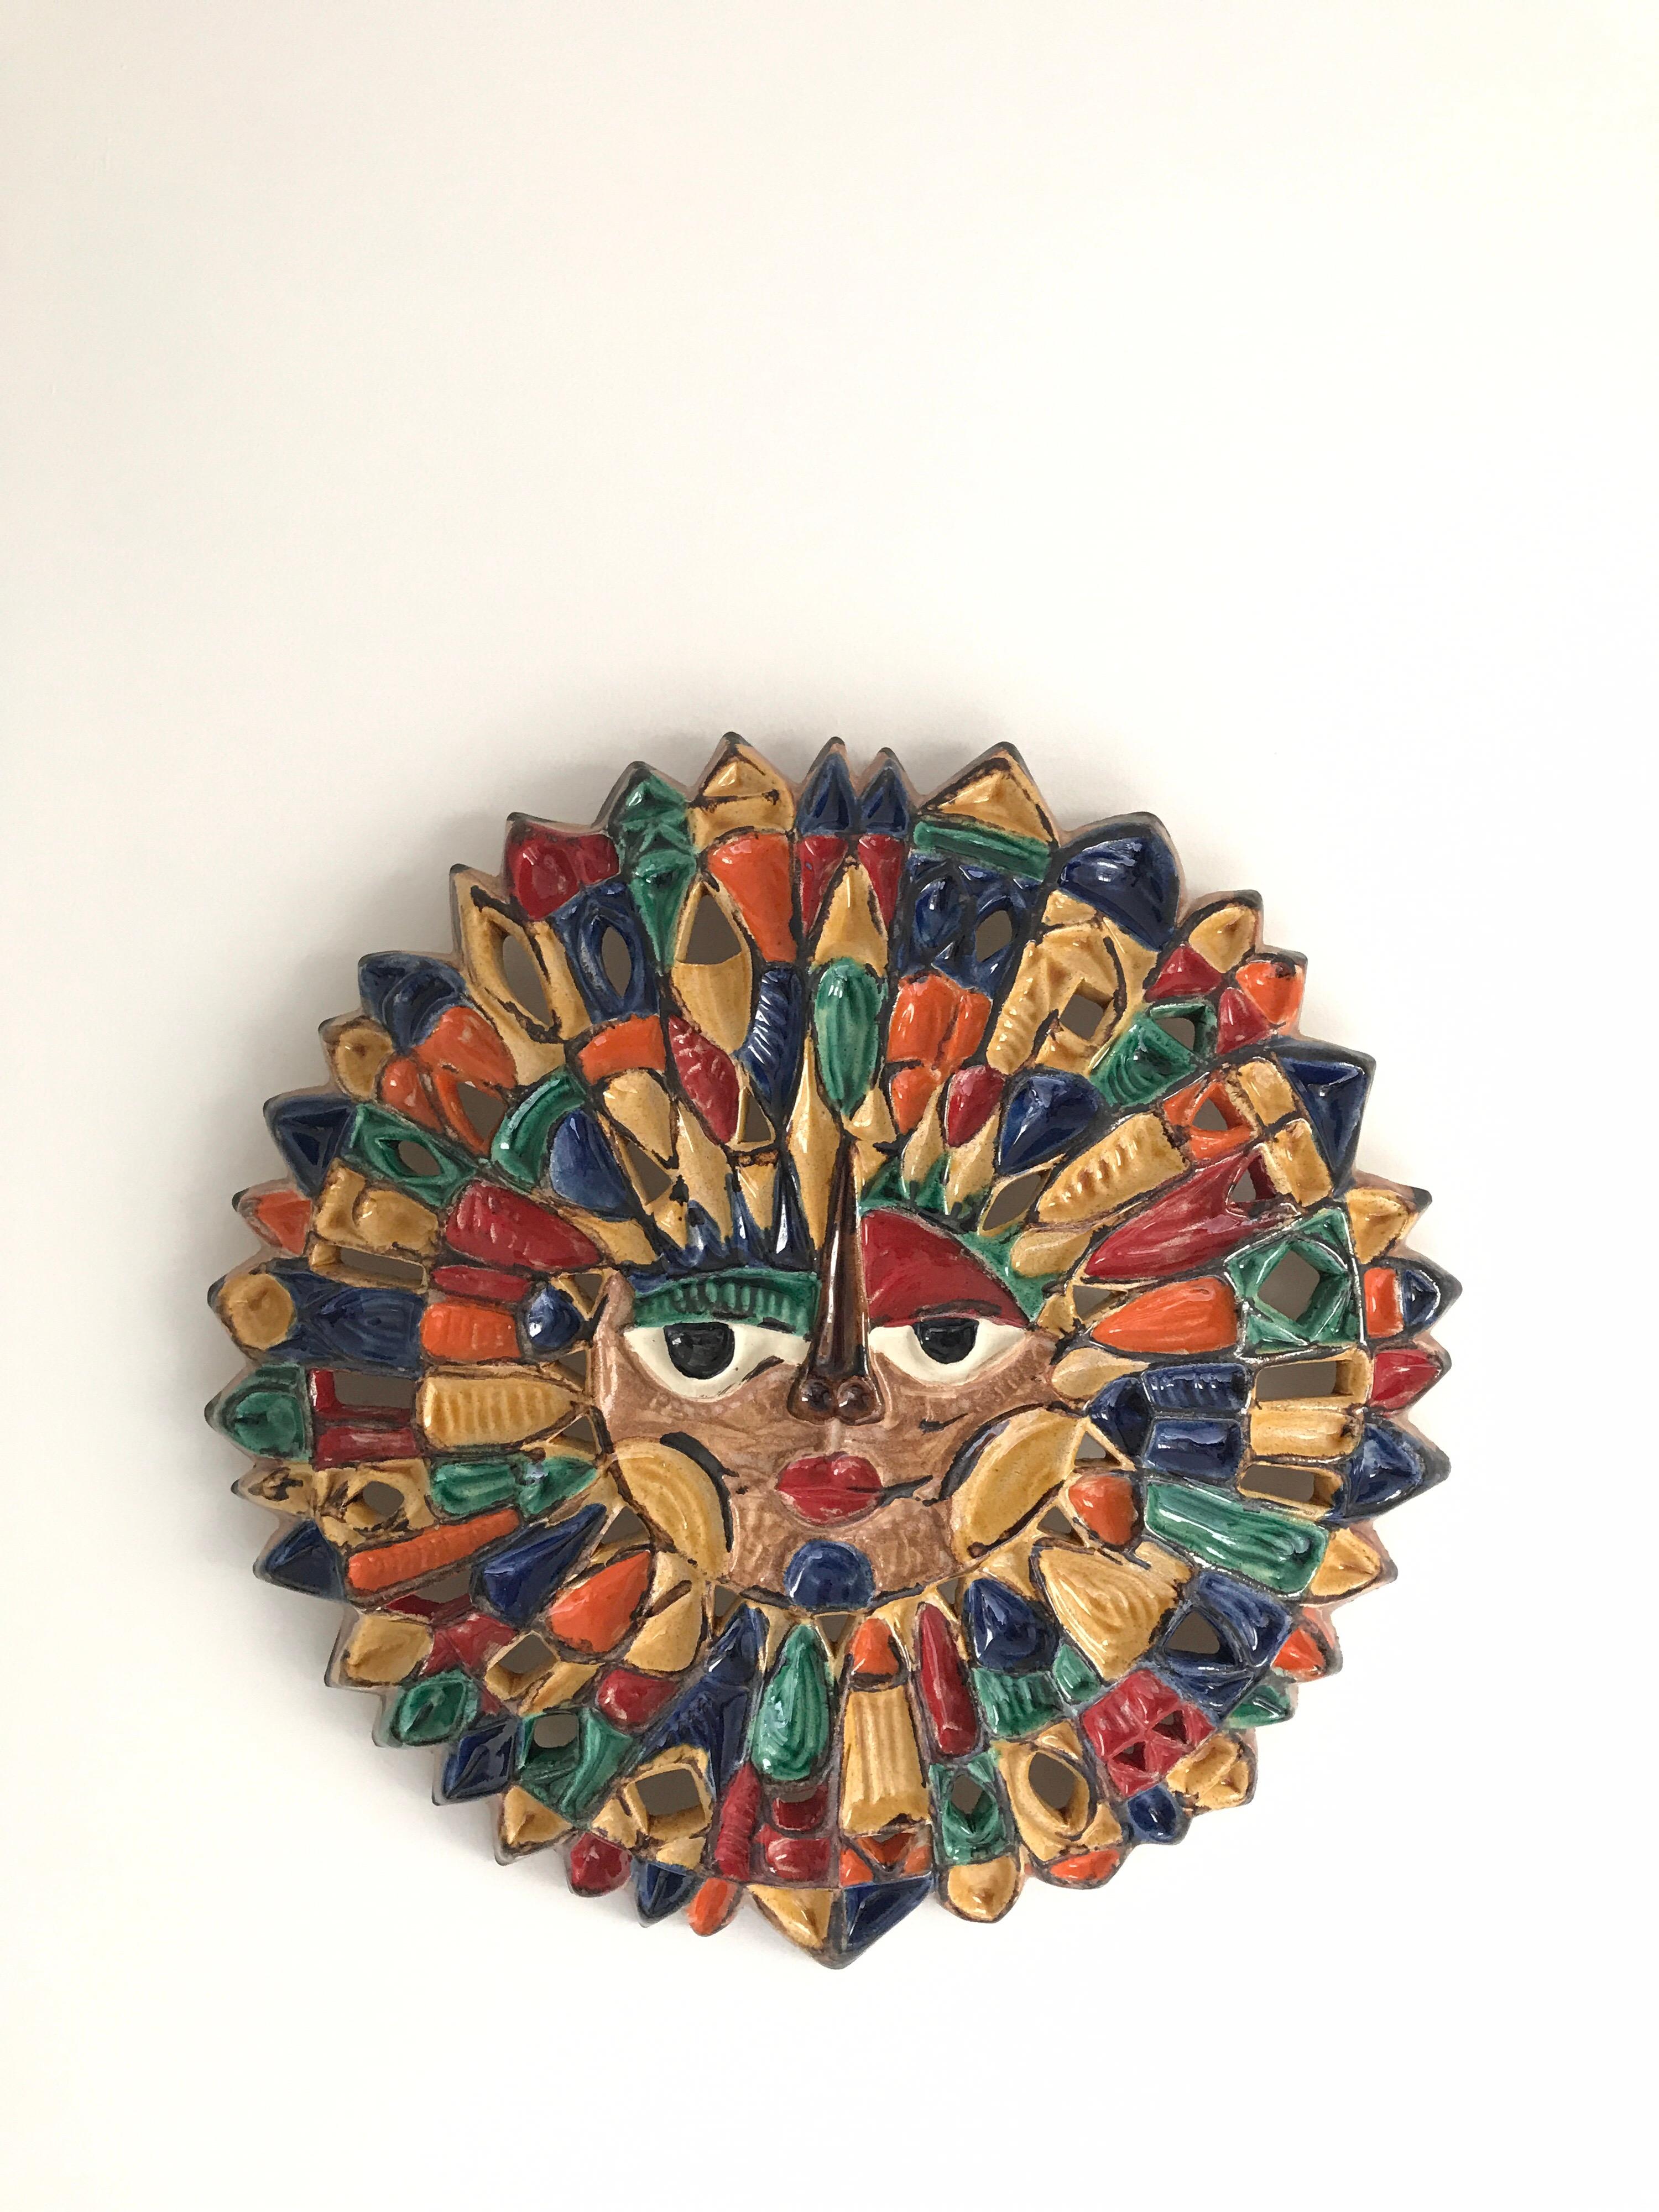 Large ceramic sun in with yellow ,blue orange and green colors
unique piece.